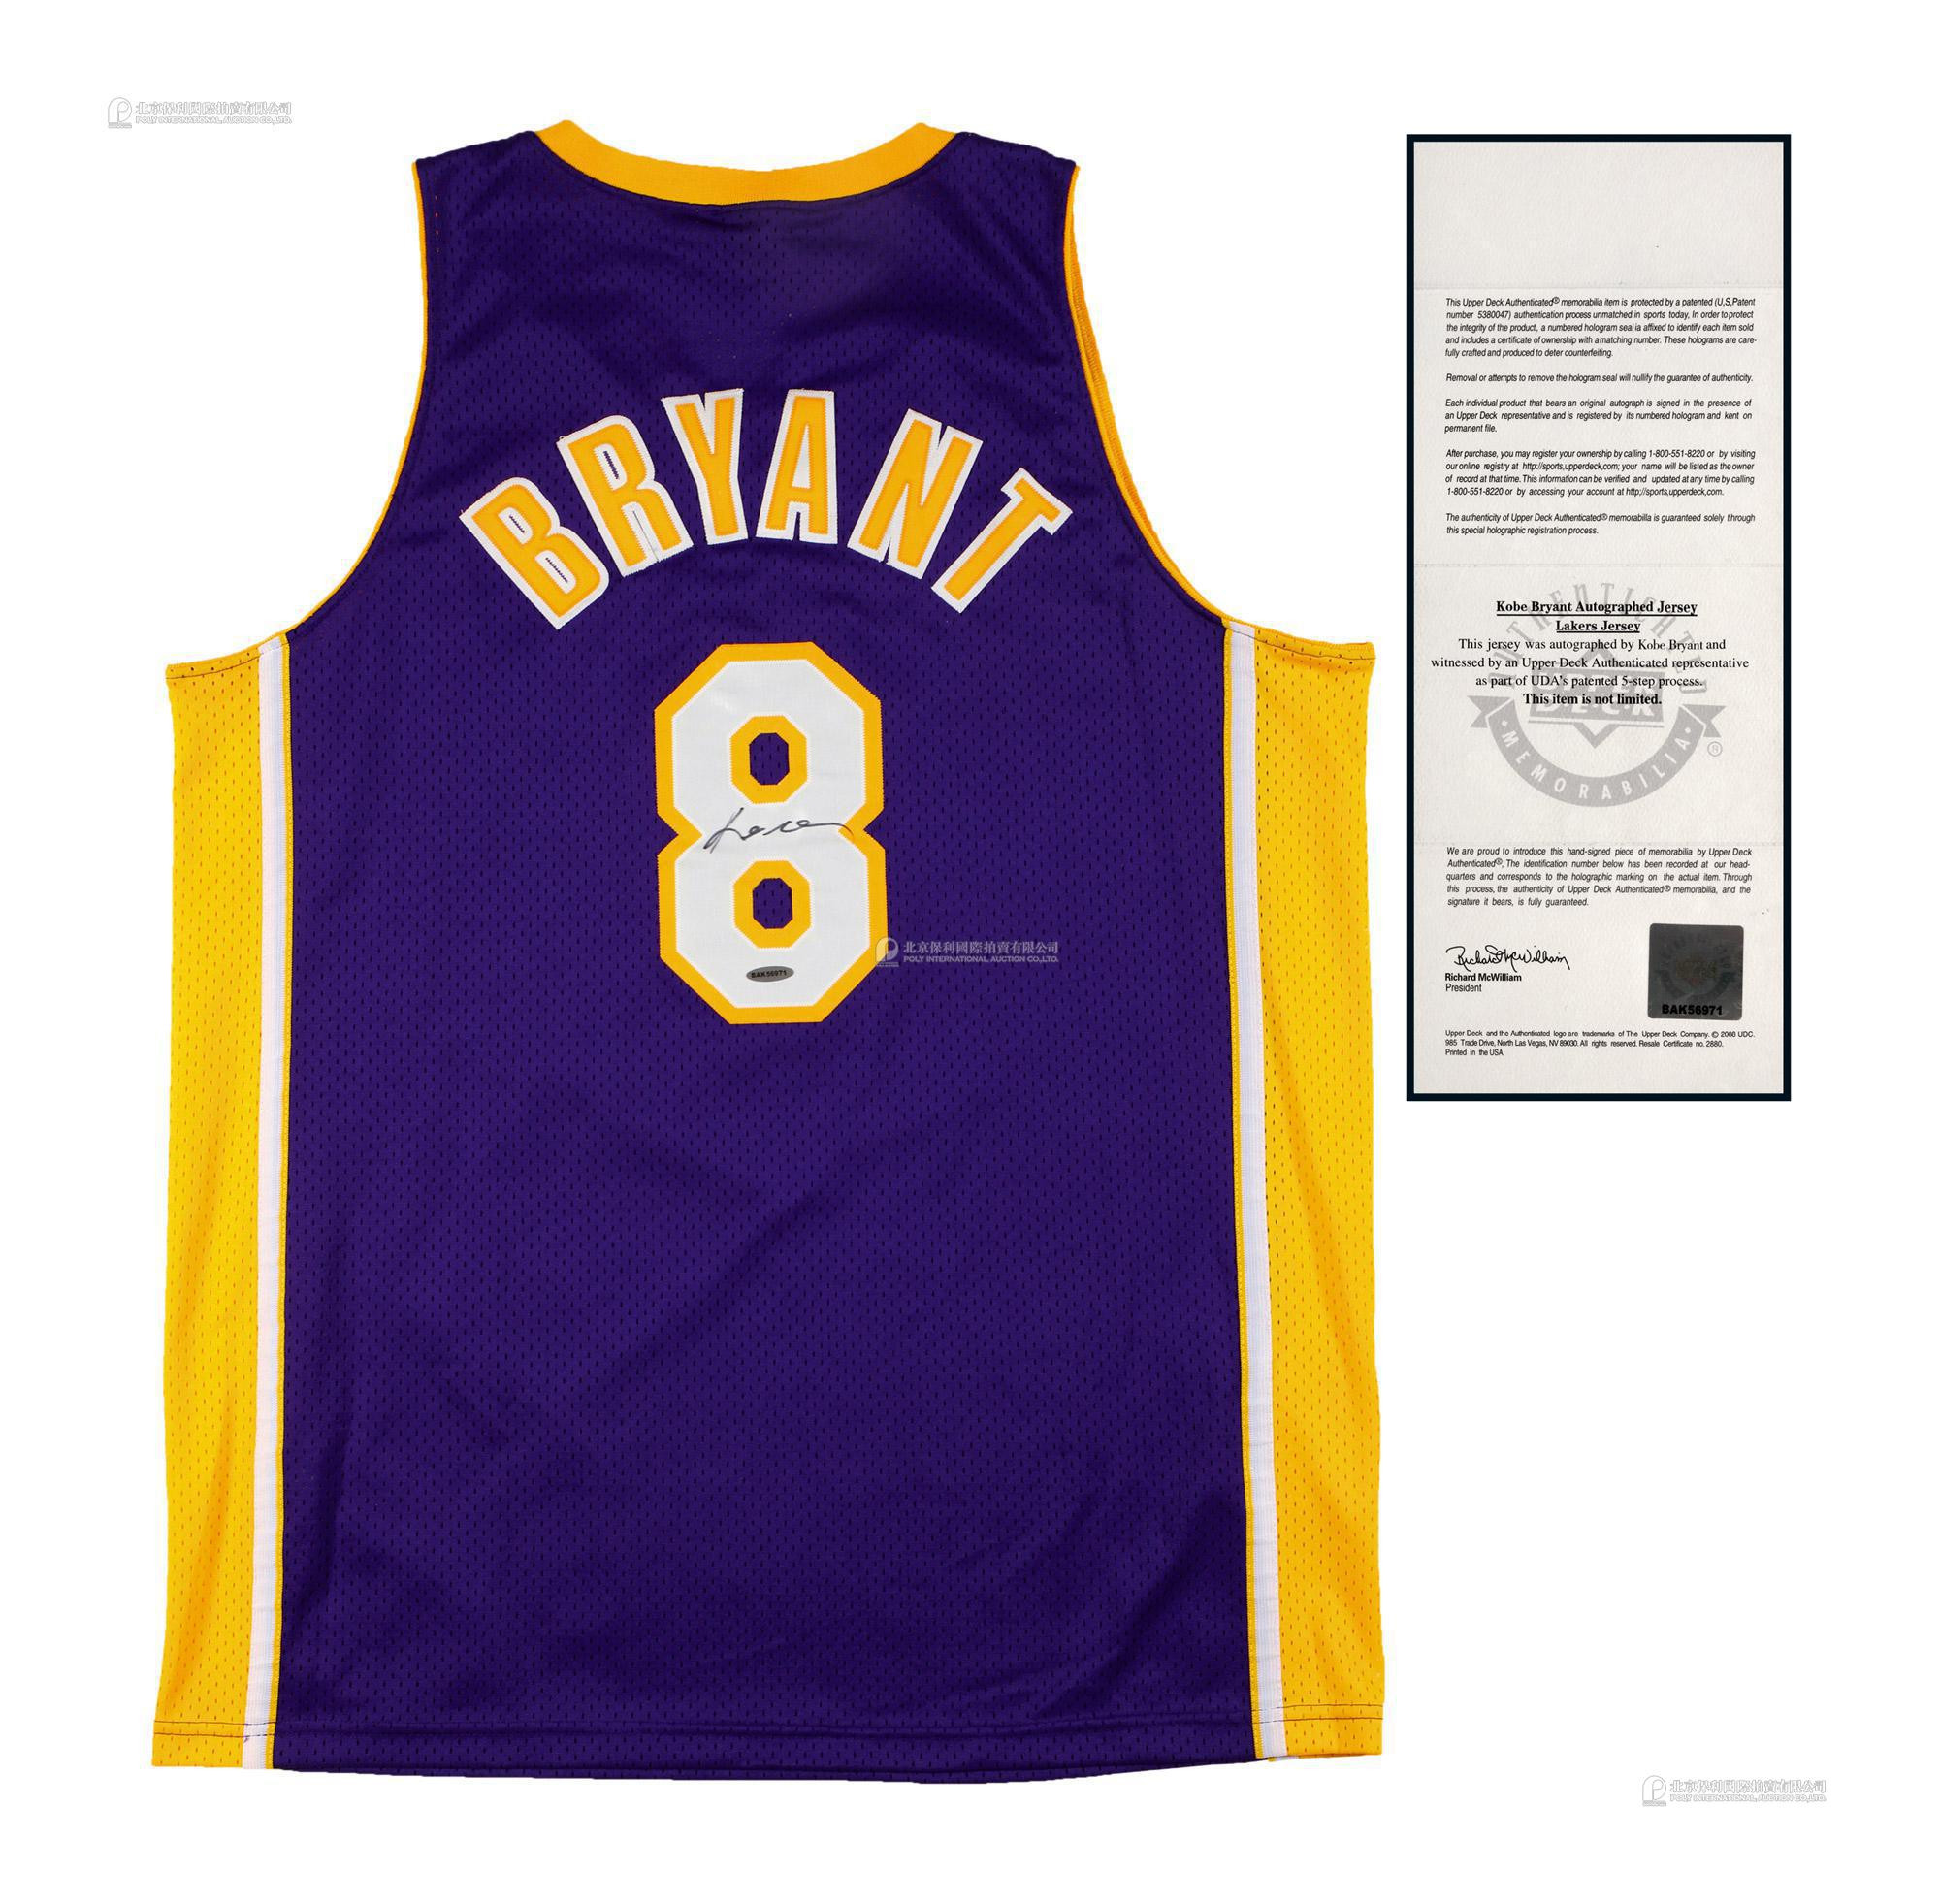 The autographed Lakers jersey of Kobe Bryant, the “Black Mamba” with certificate